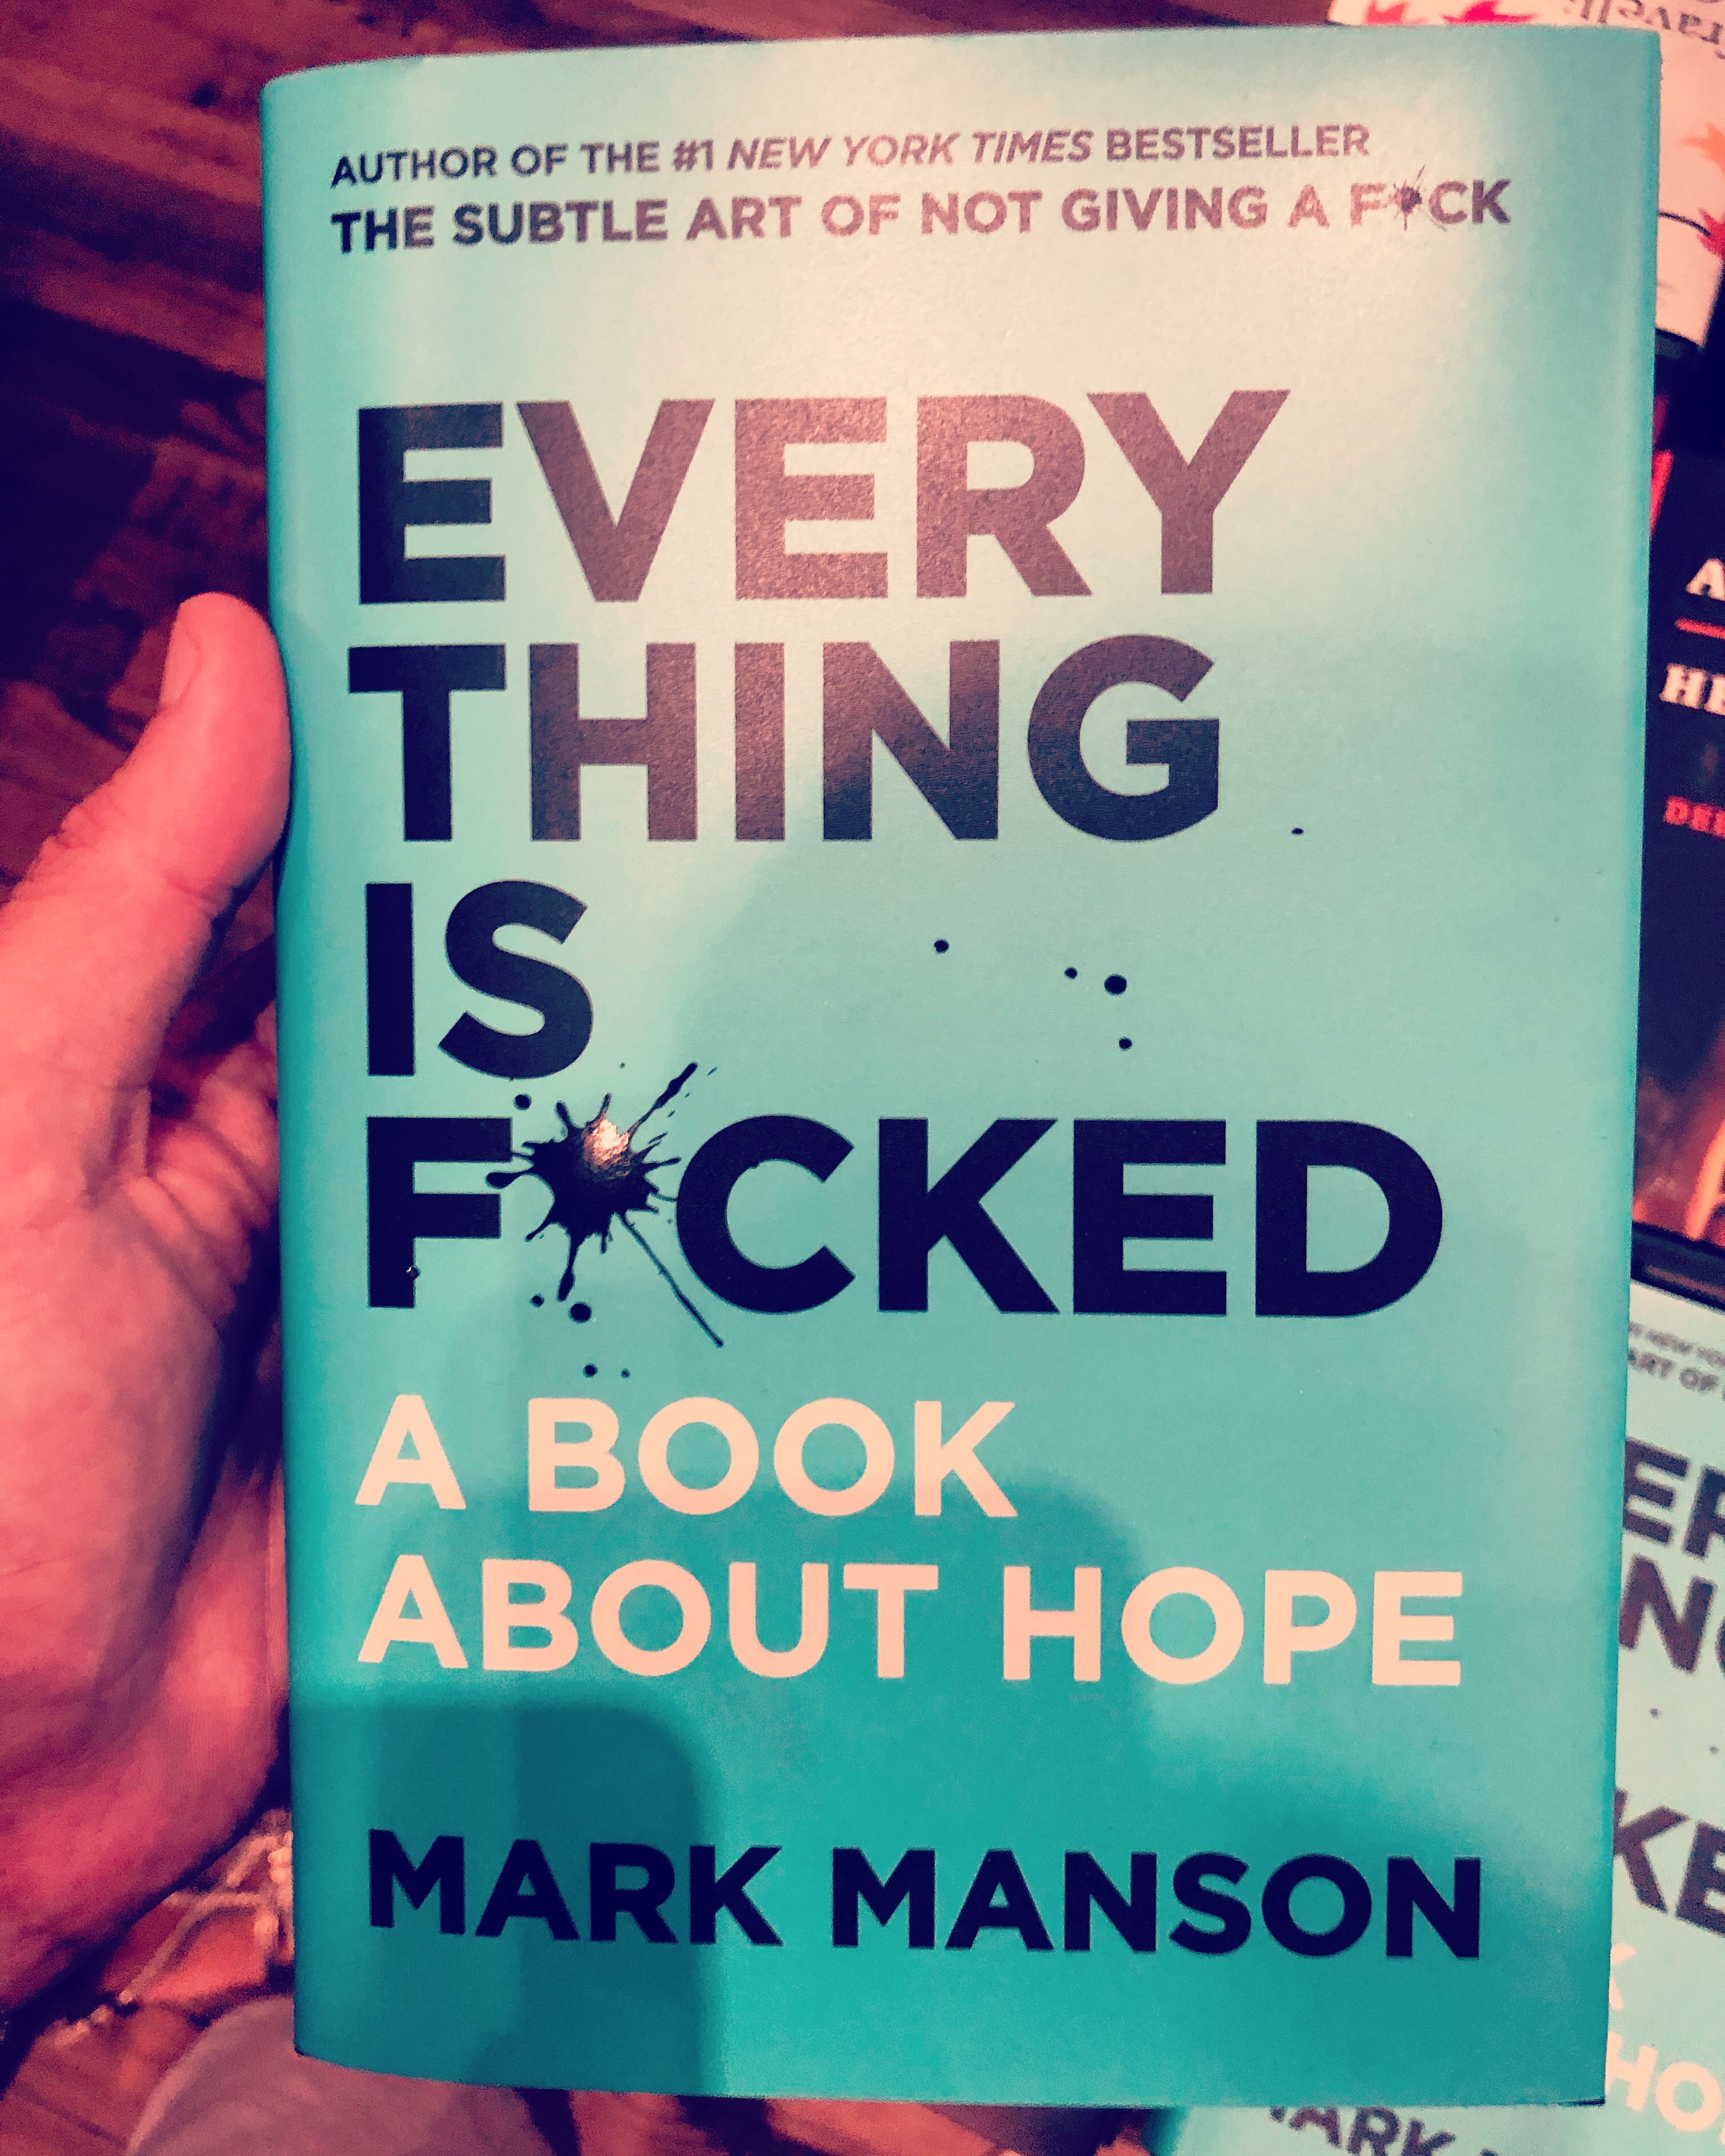 search for god and guinness - Author Of The New York Times Bestseller The Subtle Art Of Not Giving A F Ck Every Thing Is Fycked A Book About Hope Mark Manson